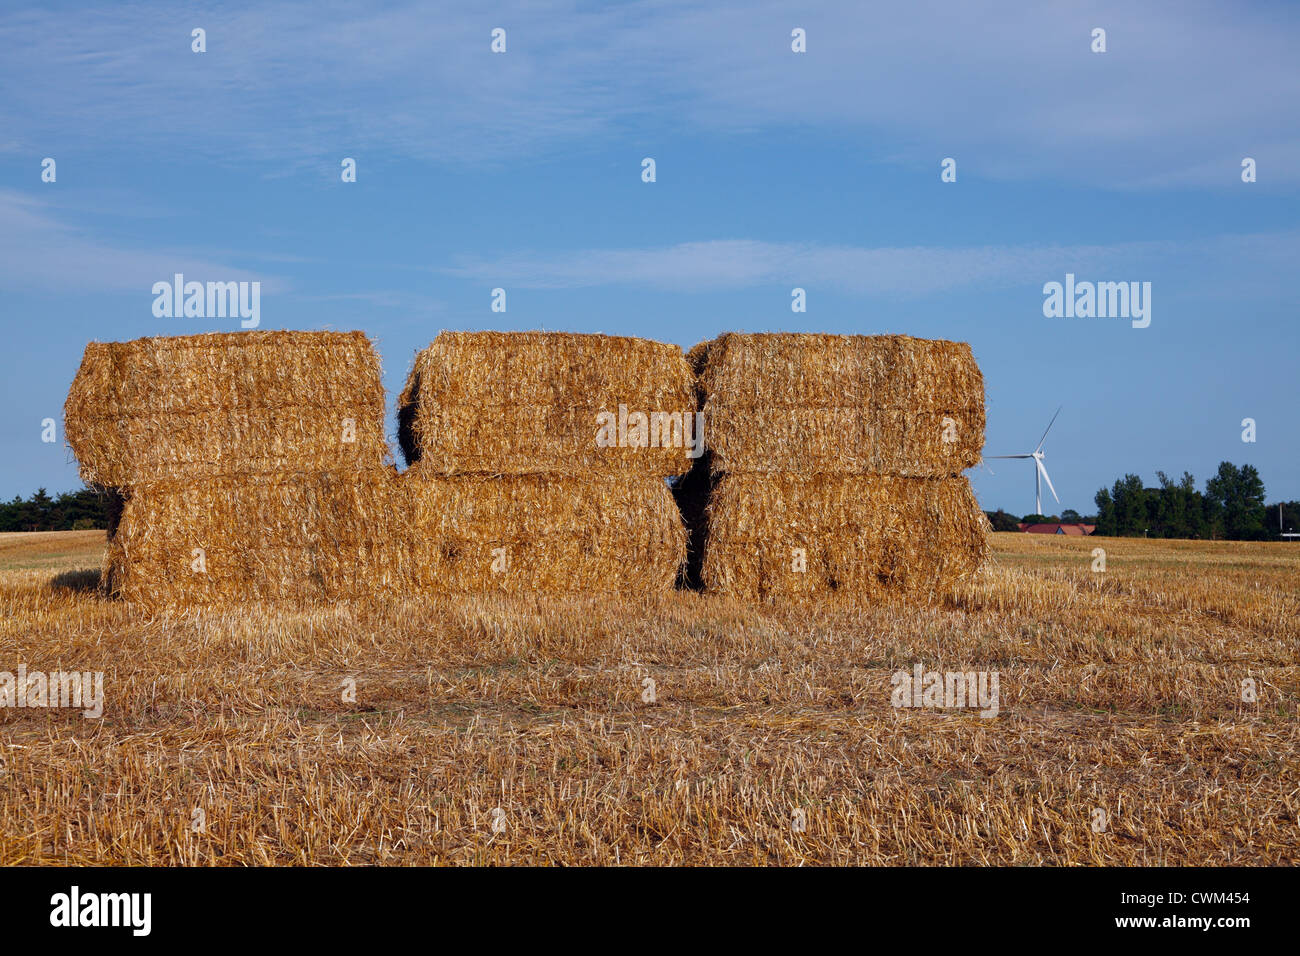 Big square straw bales on field wind turbine in the background Stock Photo